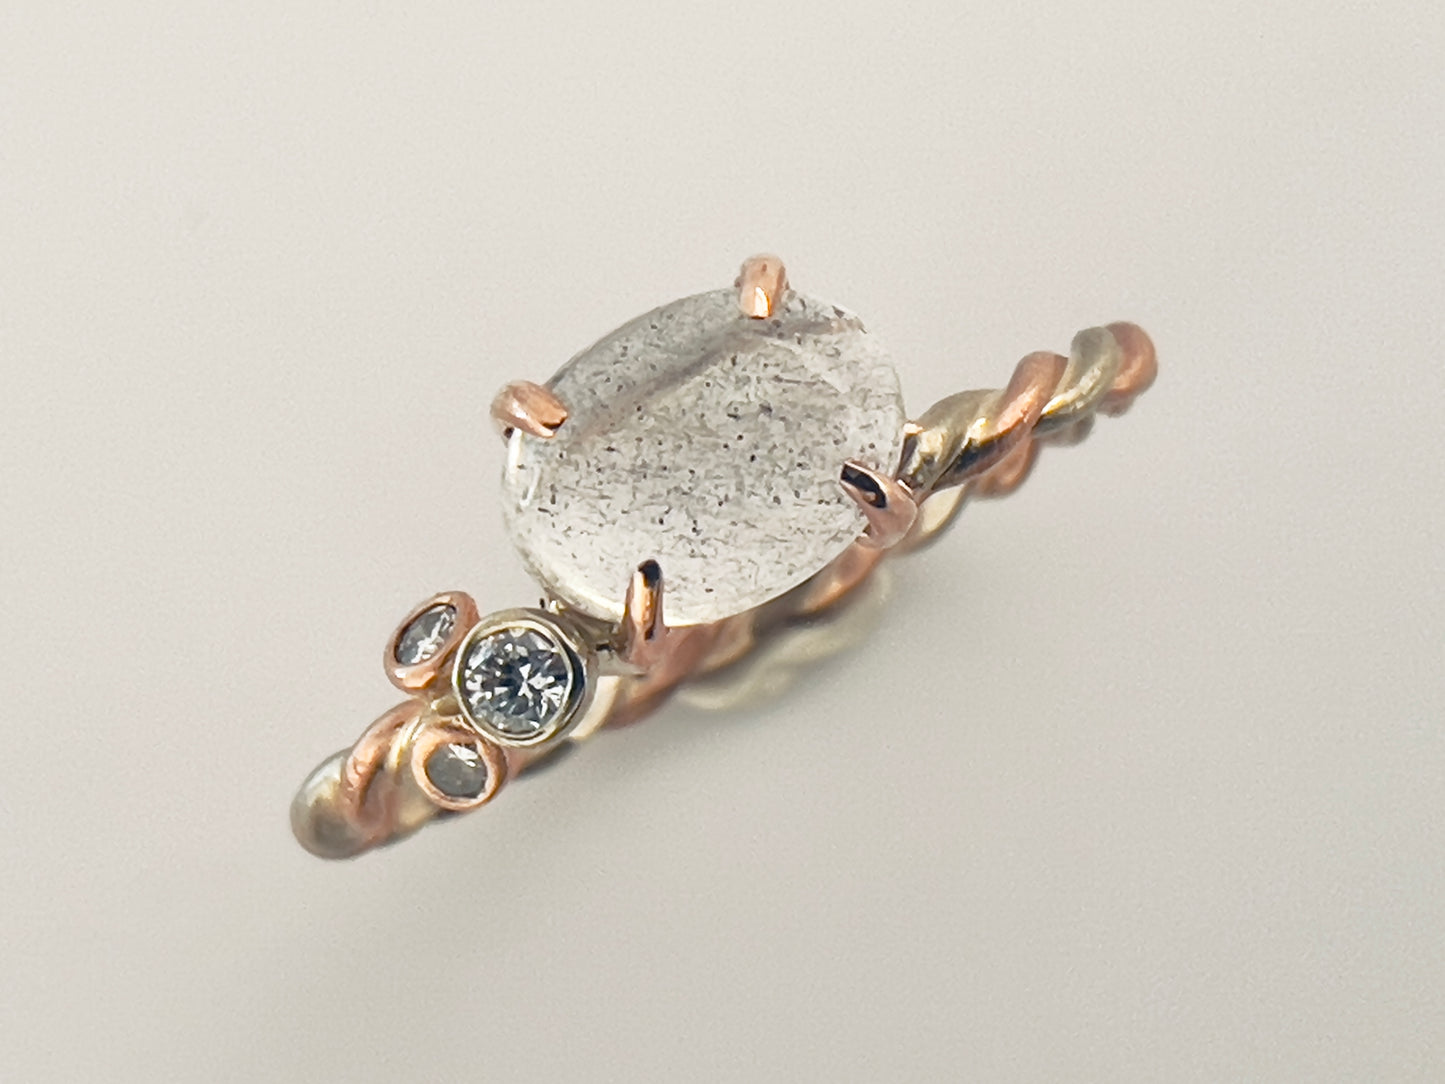 Moonstone 4-Prong White and Rose Gold Ring 5x7mm, east-west oval cabochon with clustered diamonds and a two-tone twist band, size 6